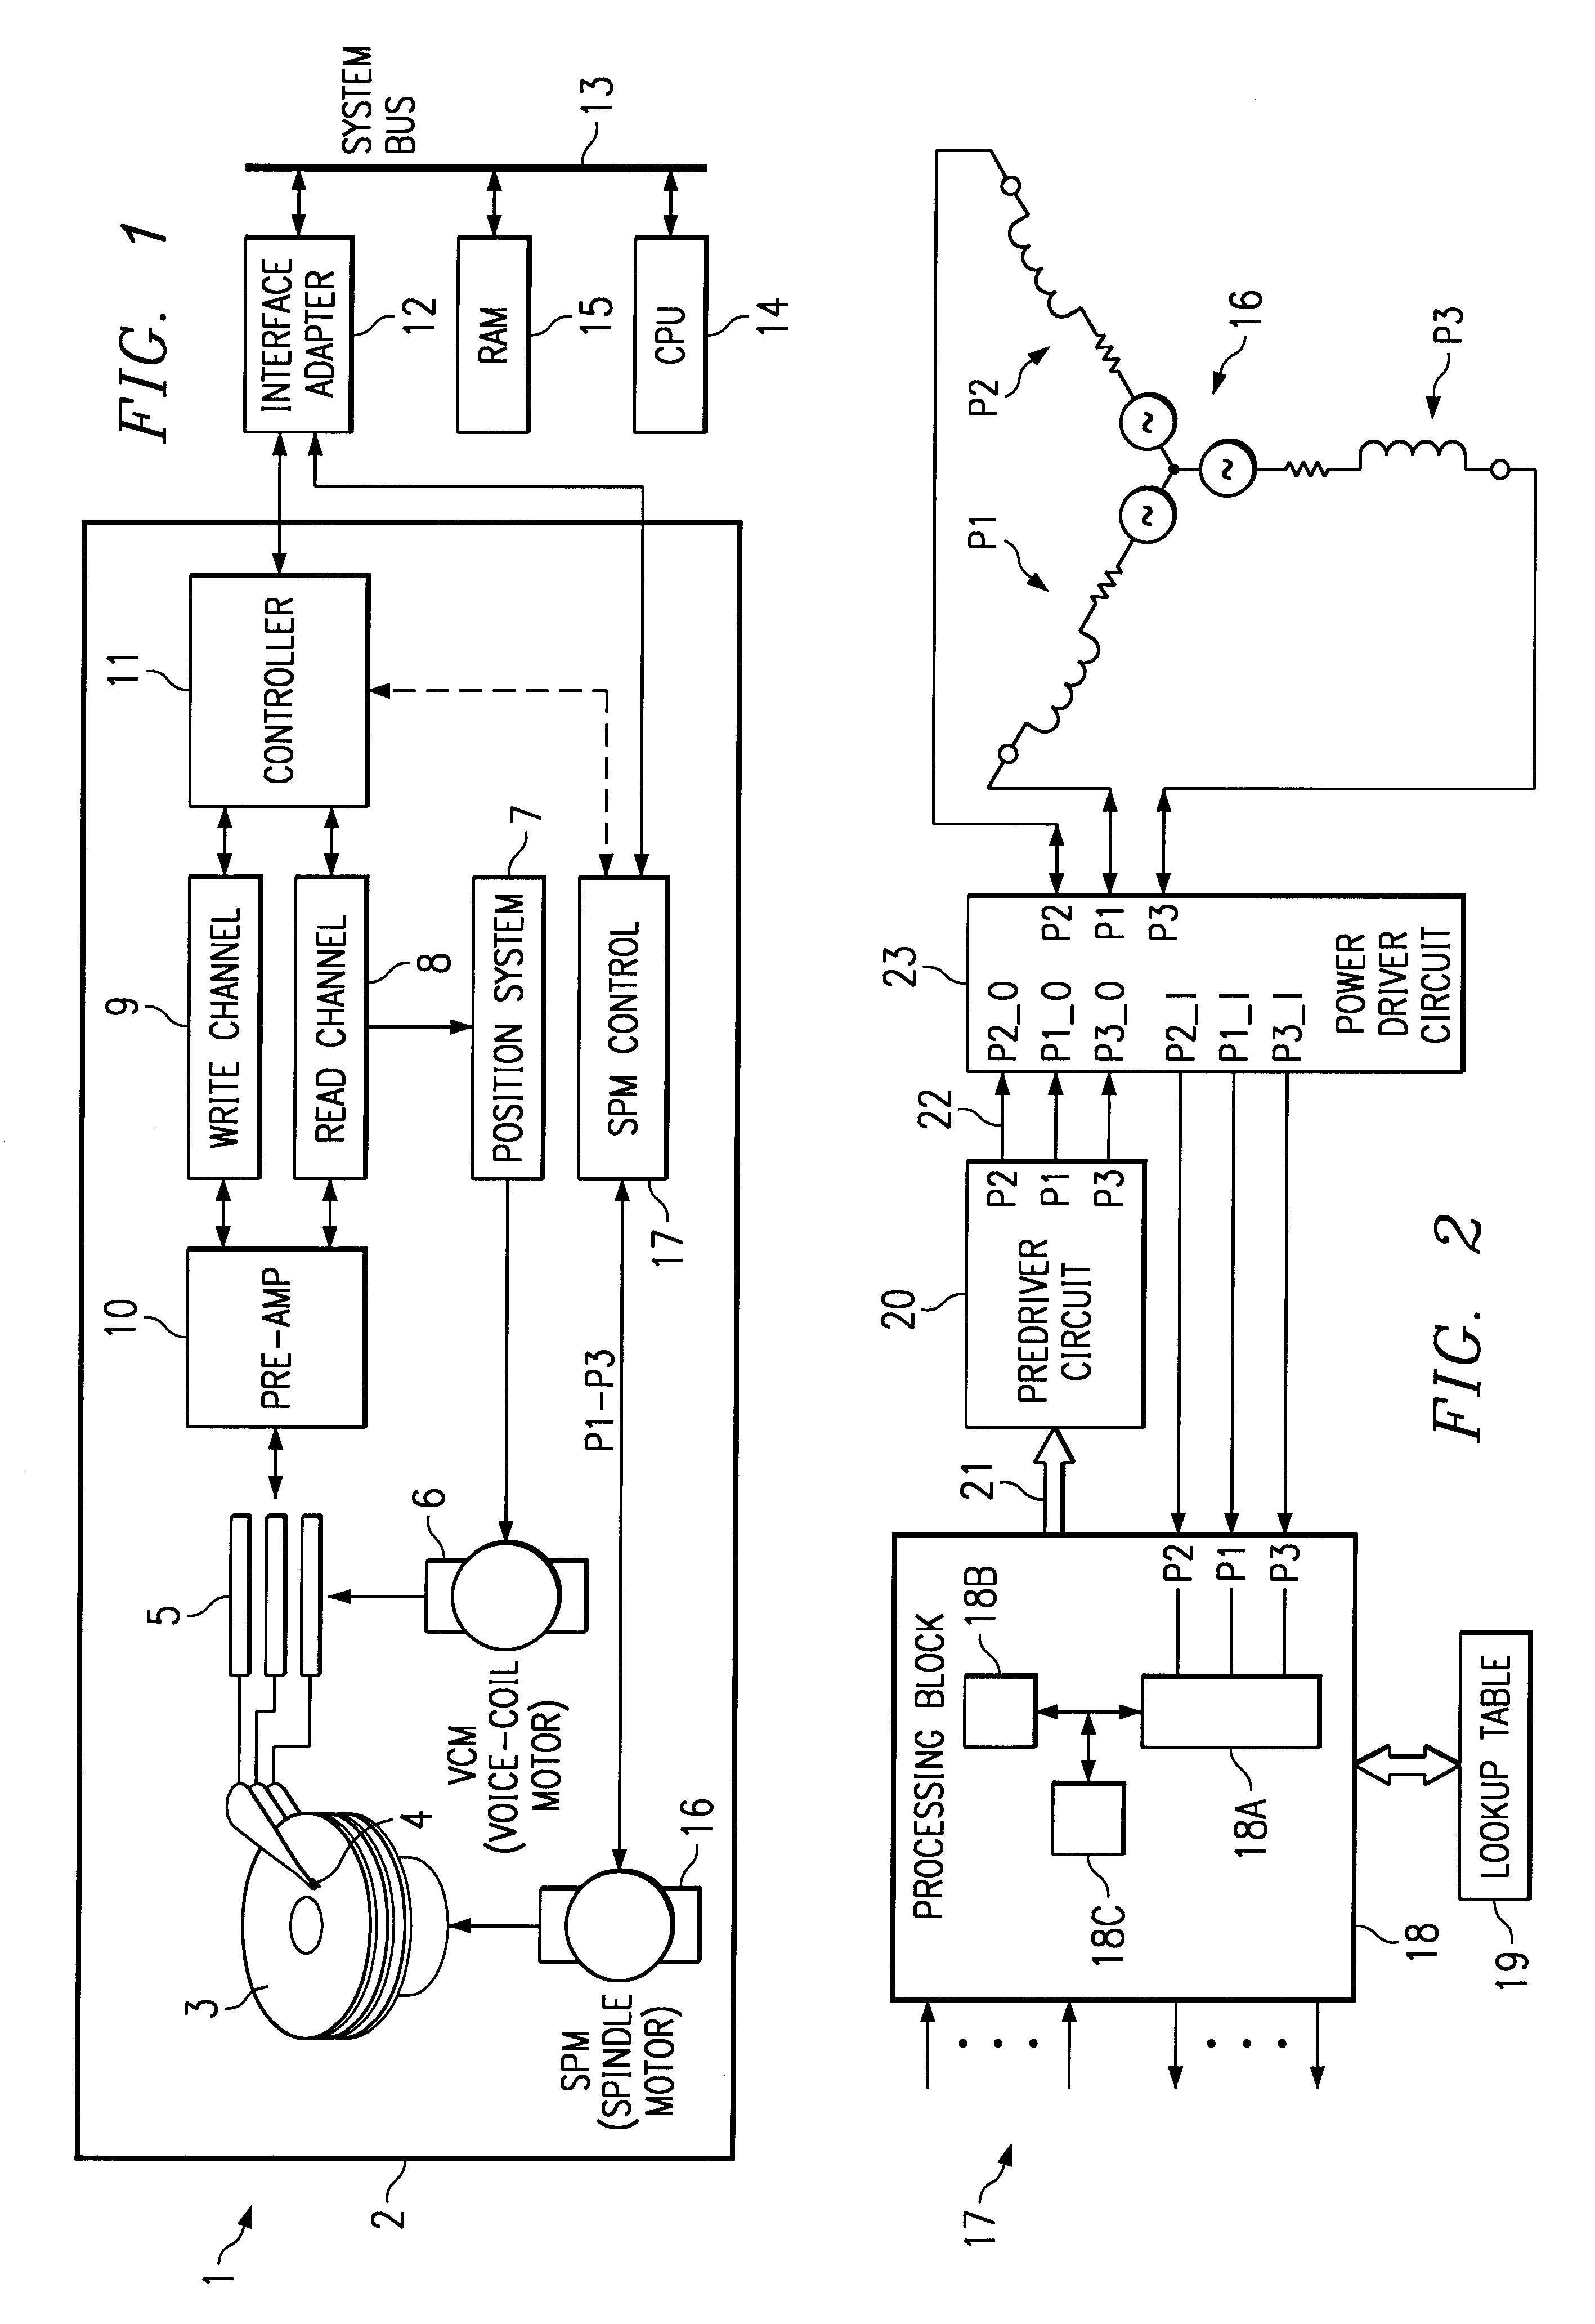 Method and apparatus for spinning a multiphase motor for a disk drive system from an inactive state